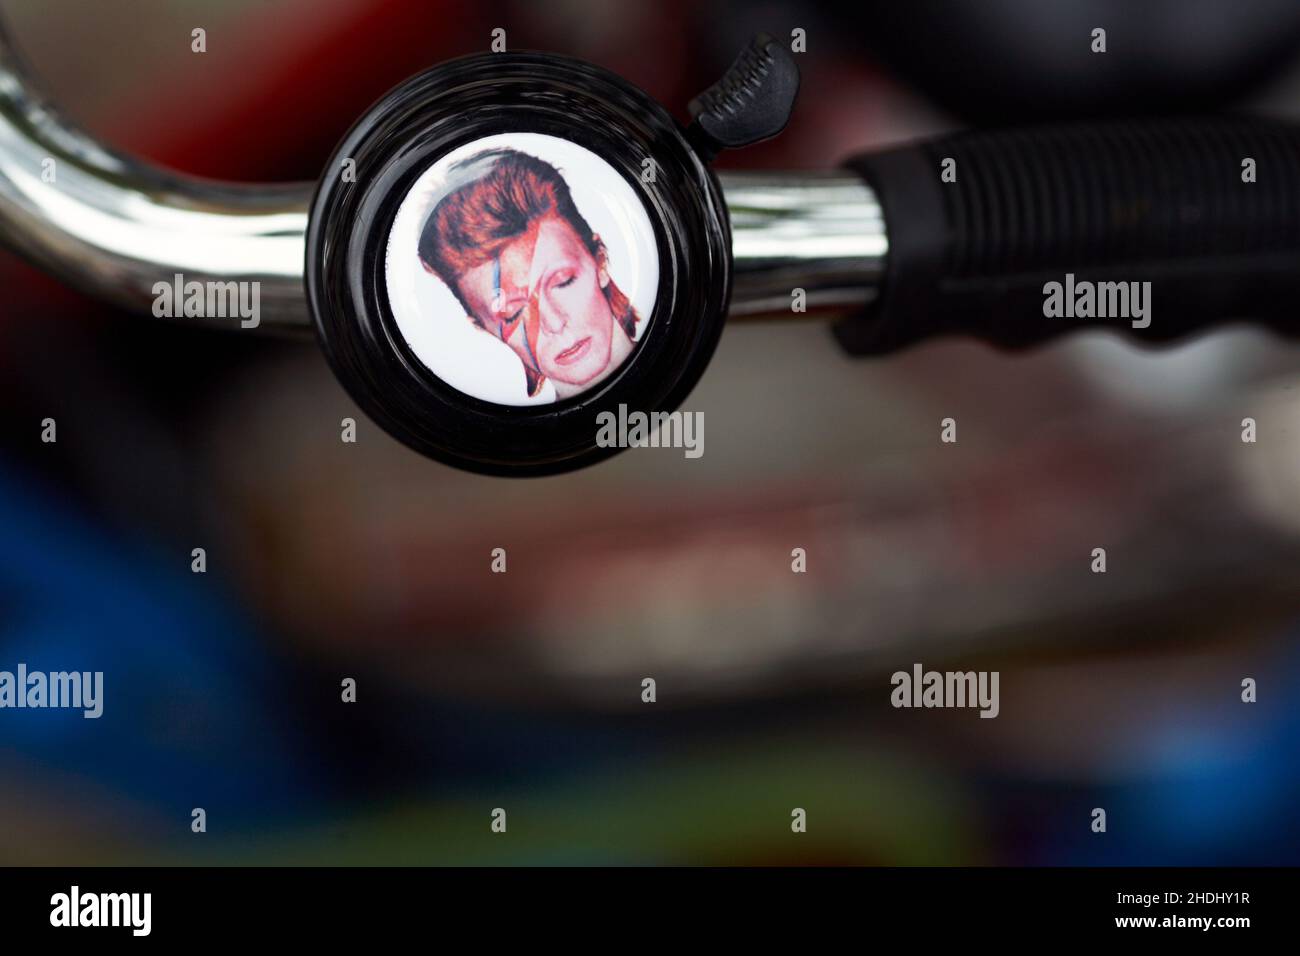 David Bowie – Ziggy Stardust bicycle bell .Bicycle handlebar with bell with blurred background. Stock Photo